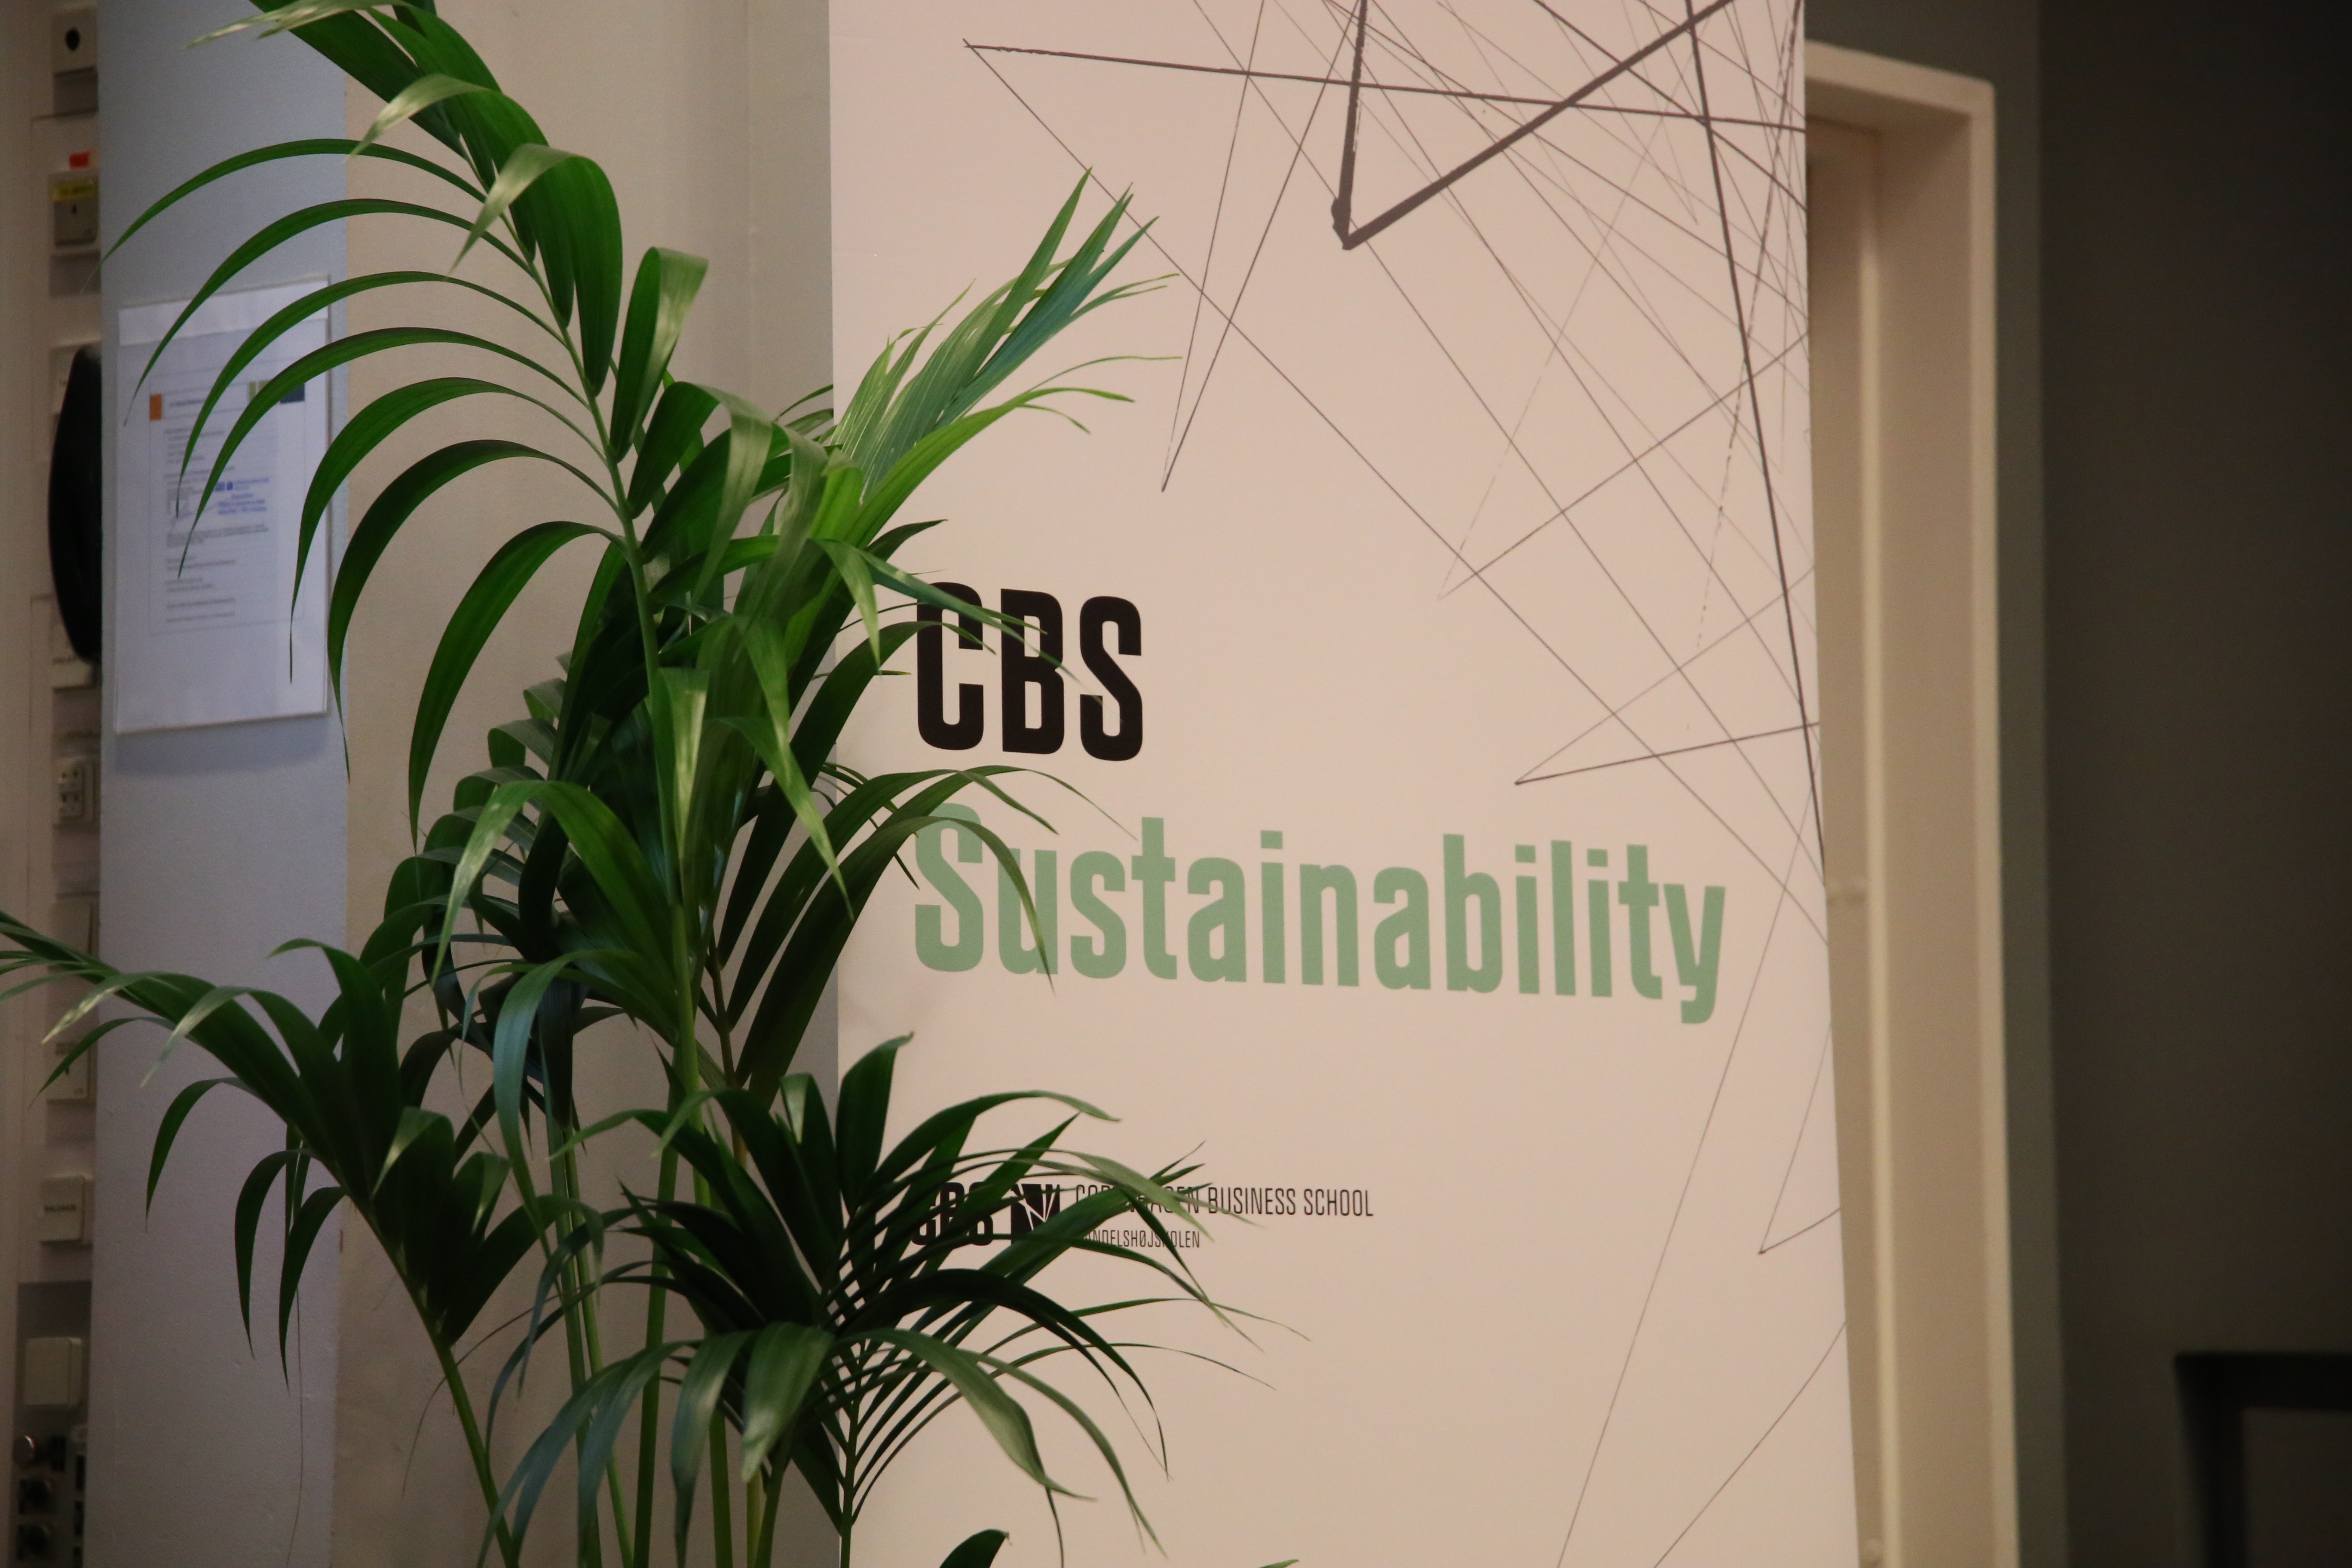 The CBS Sustainability (re-) Launch